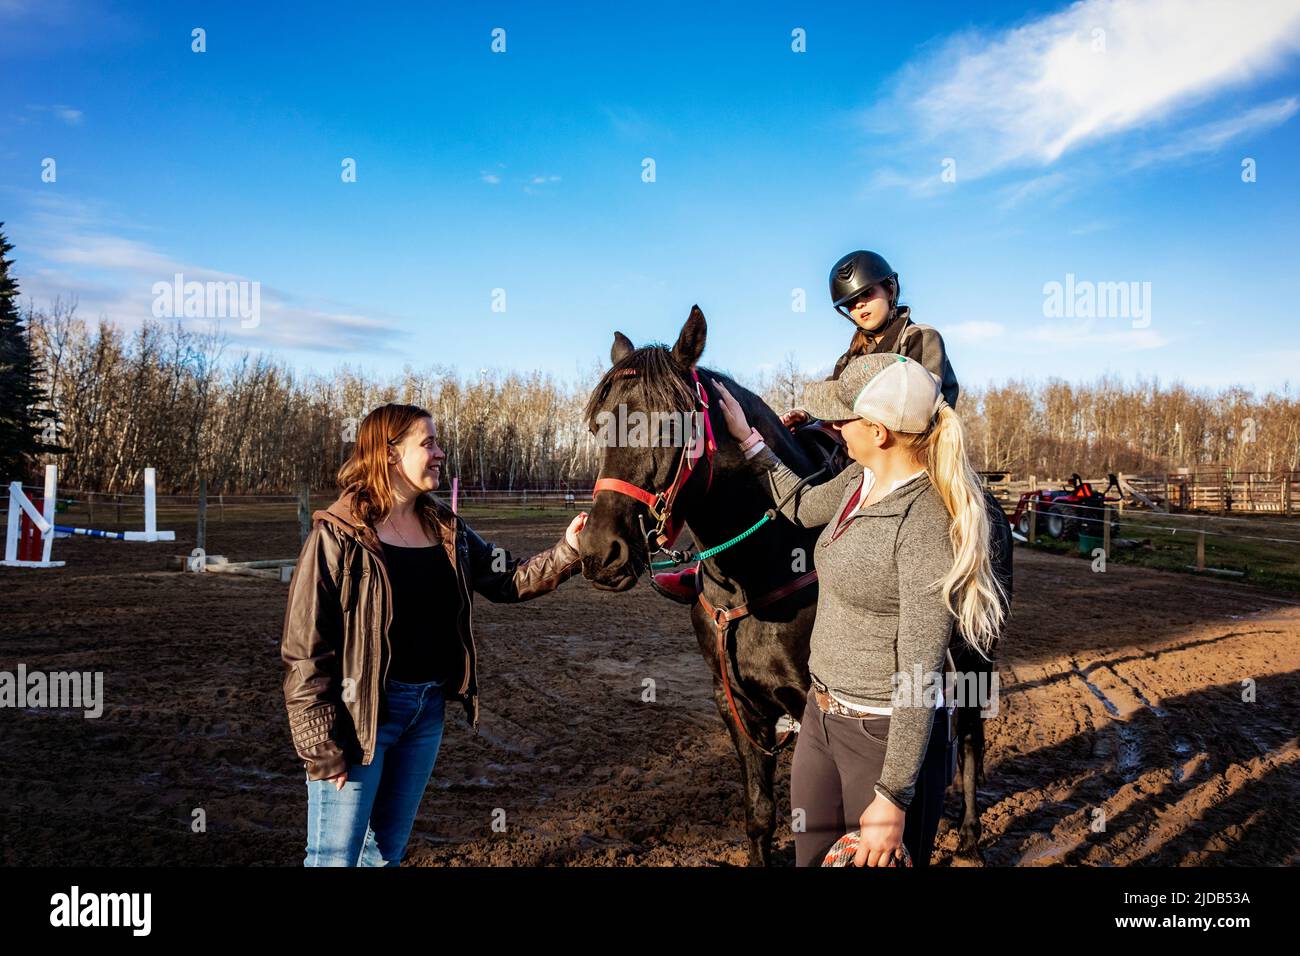 A young girl with Cerebral Palsy, her Mom and her trainer working with a horse during a Hippotherapy session; Westlock, Alberta, Canada Stock Photo